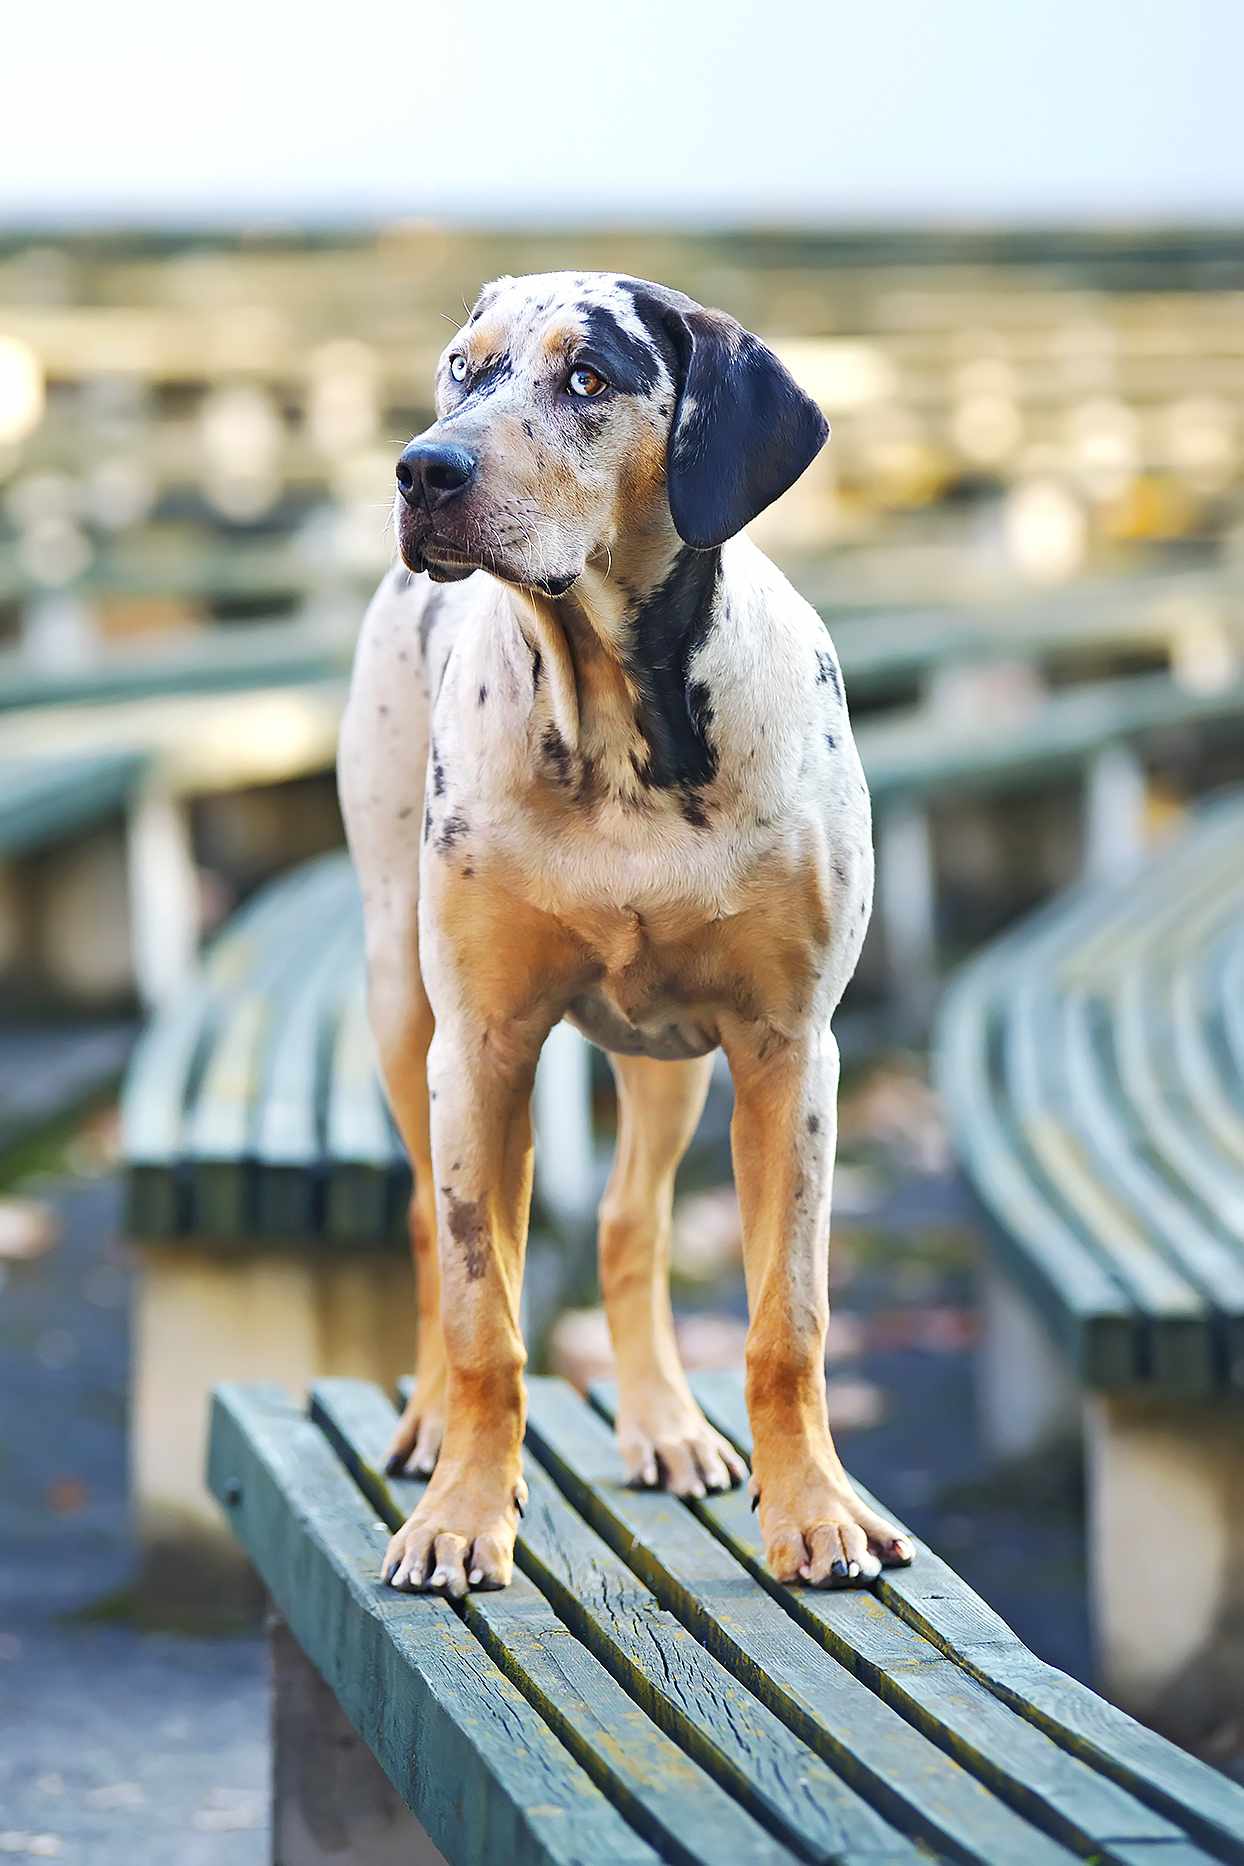 catahoula leopard dog standing on wooden bench